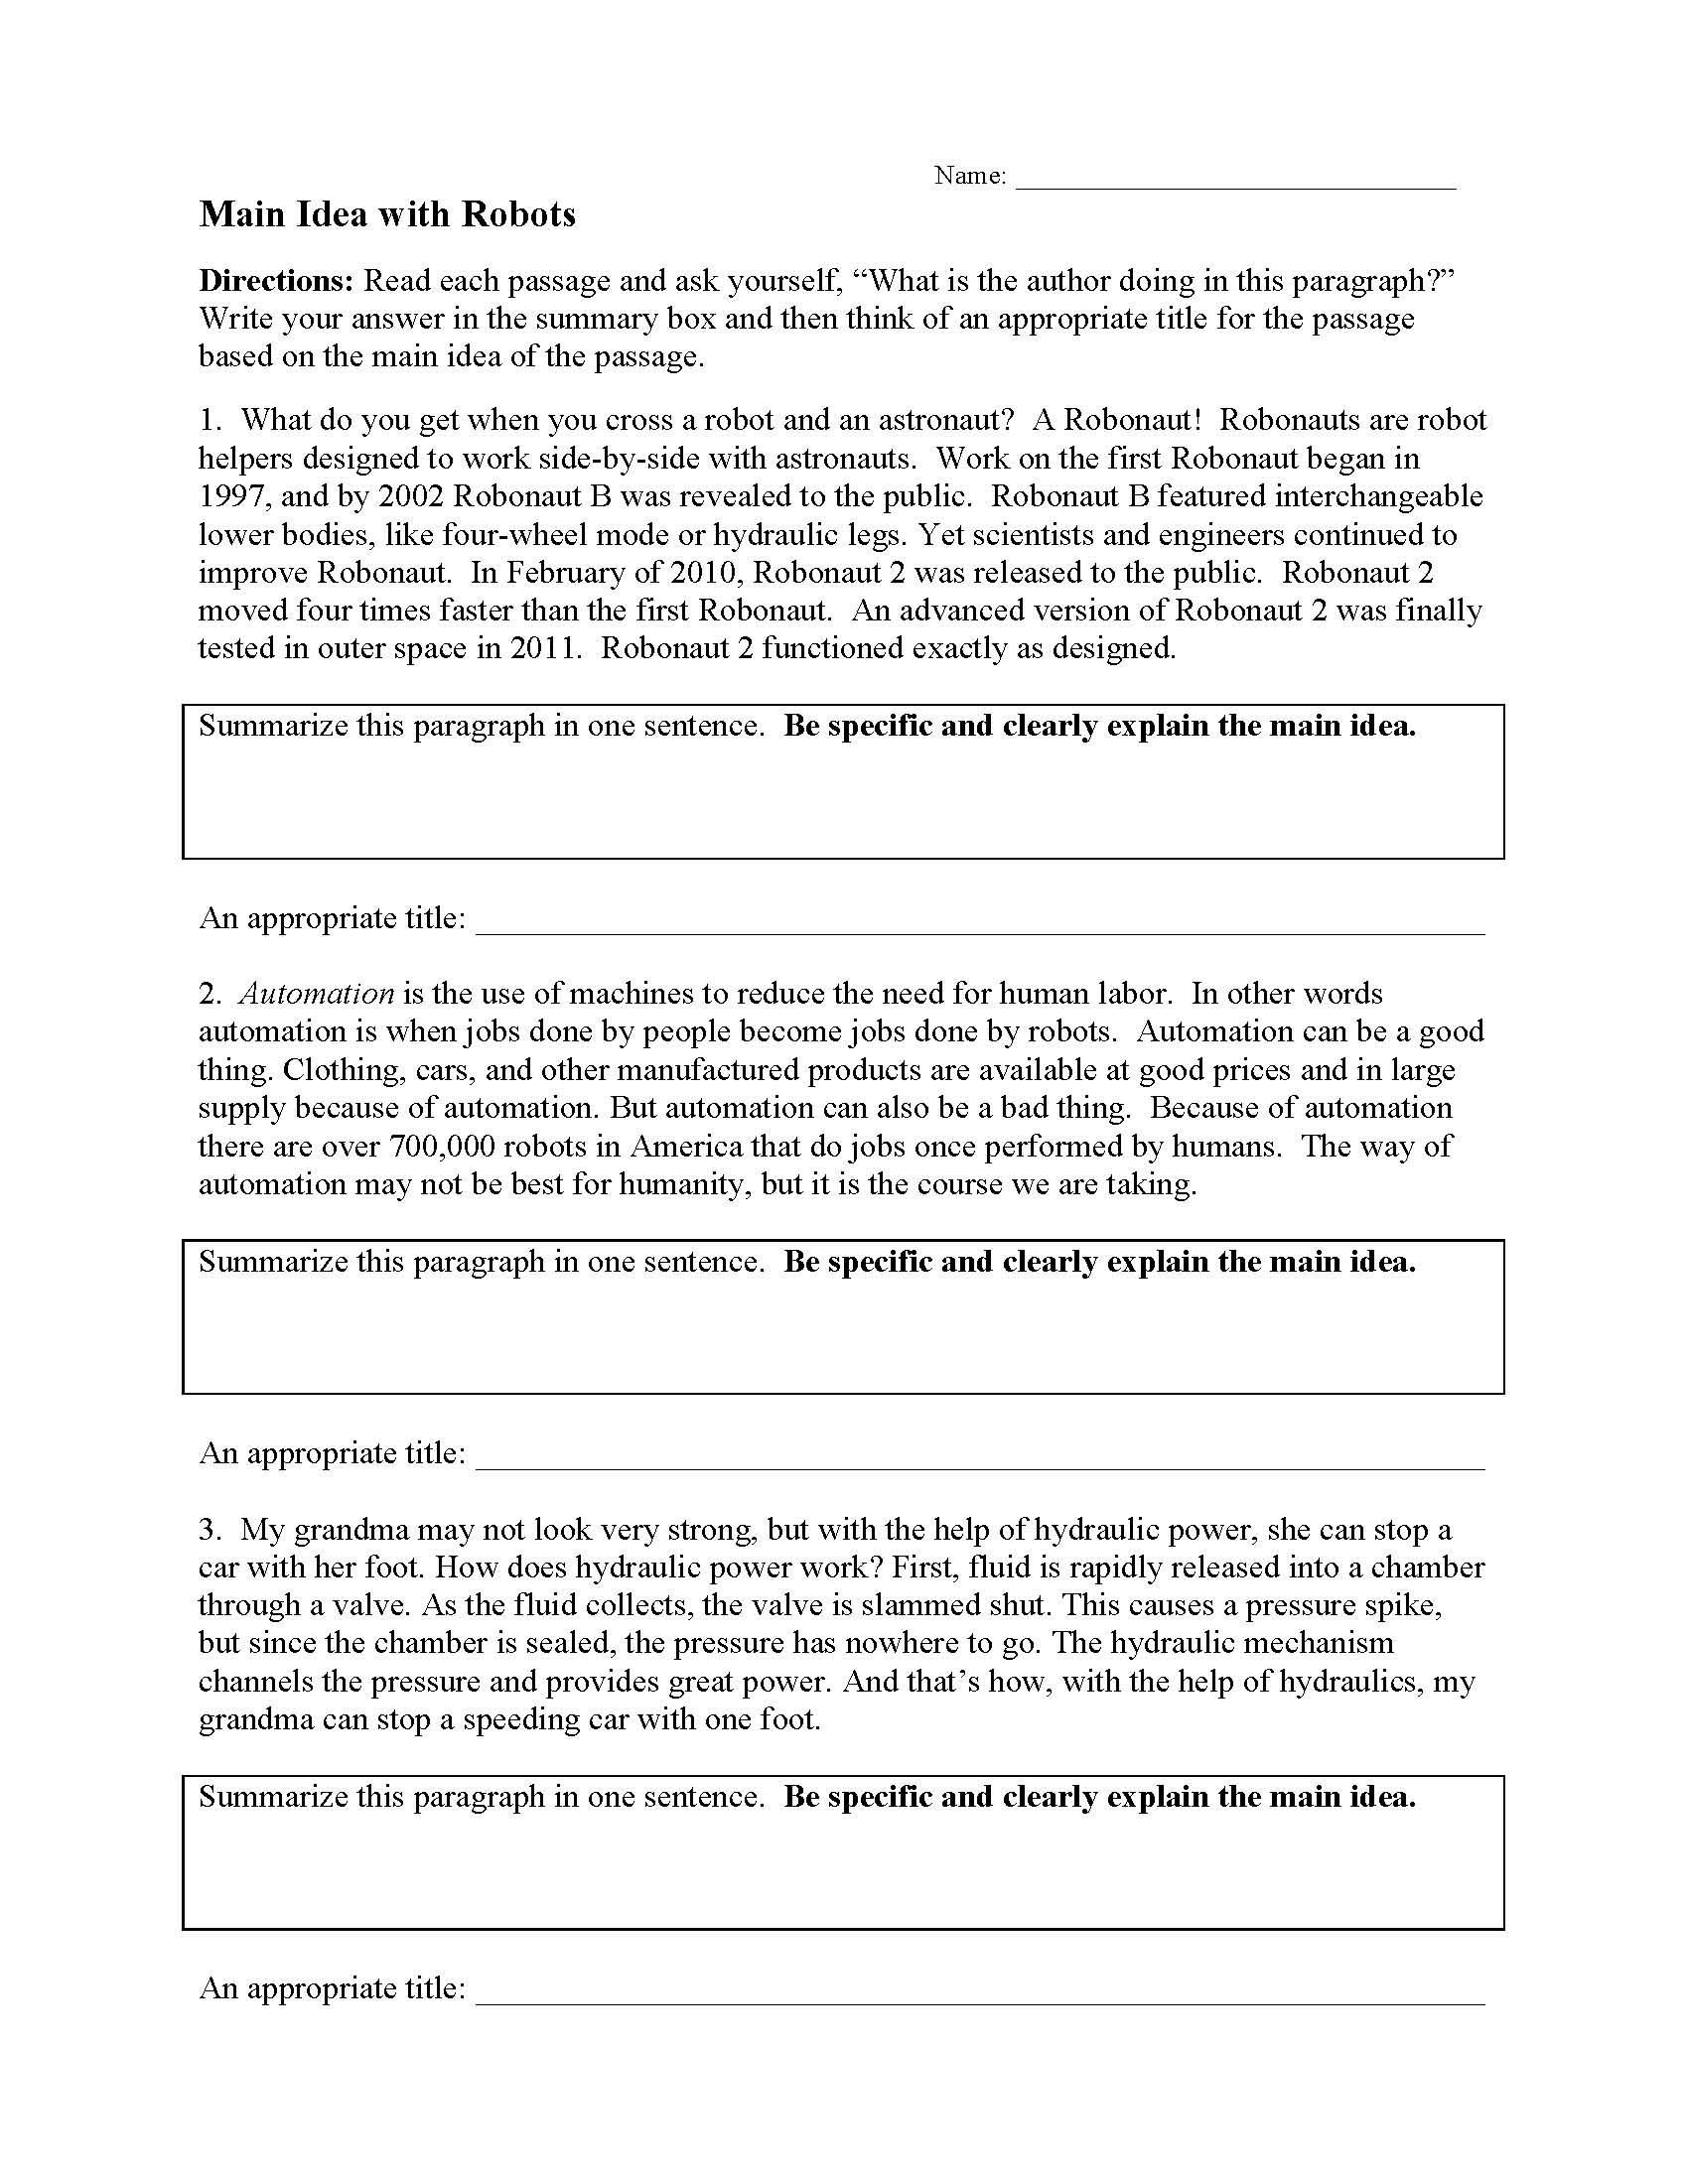 This is a preview image of Main Idea Worksheet 3. Click on it to enlarge it or view the source file.